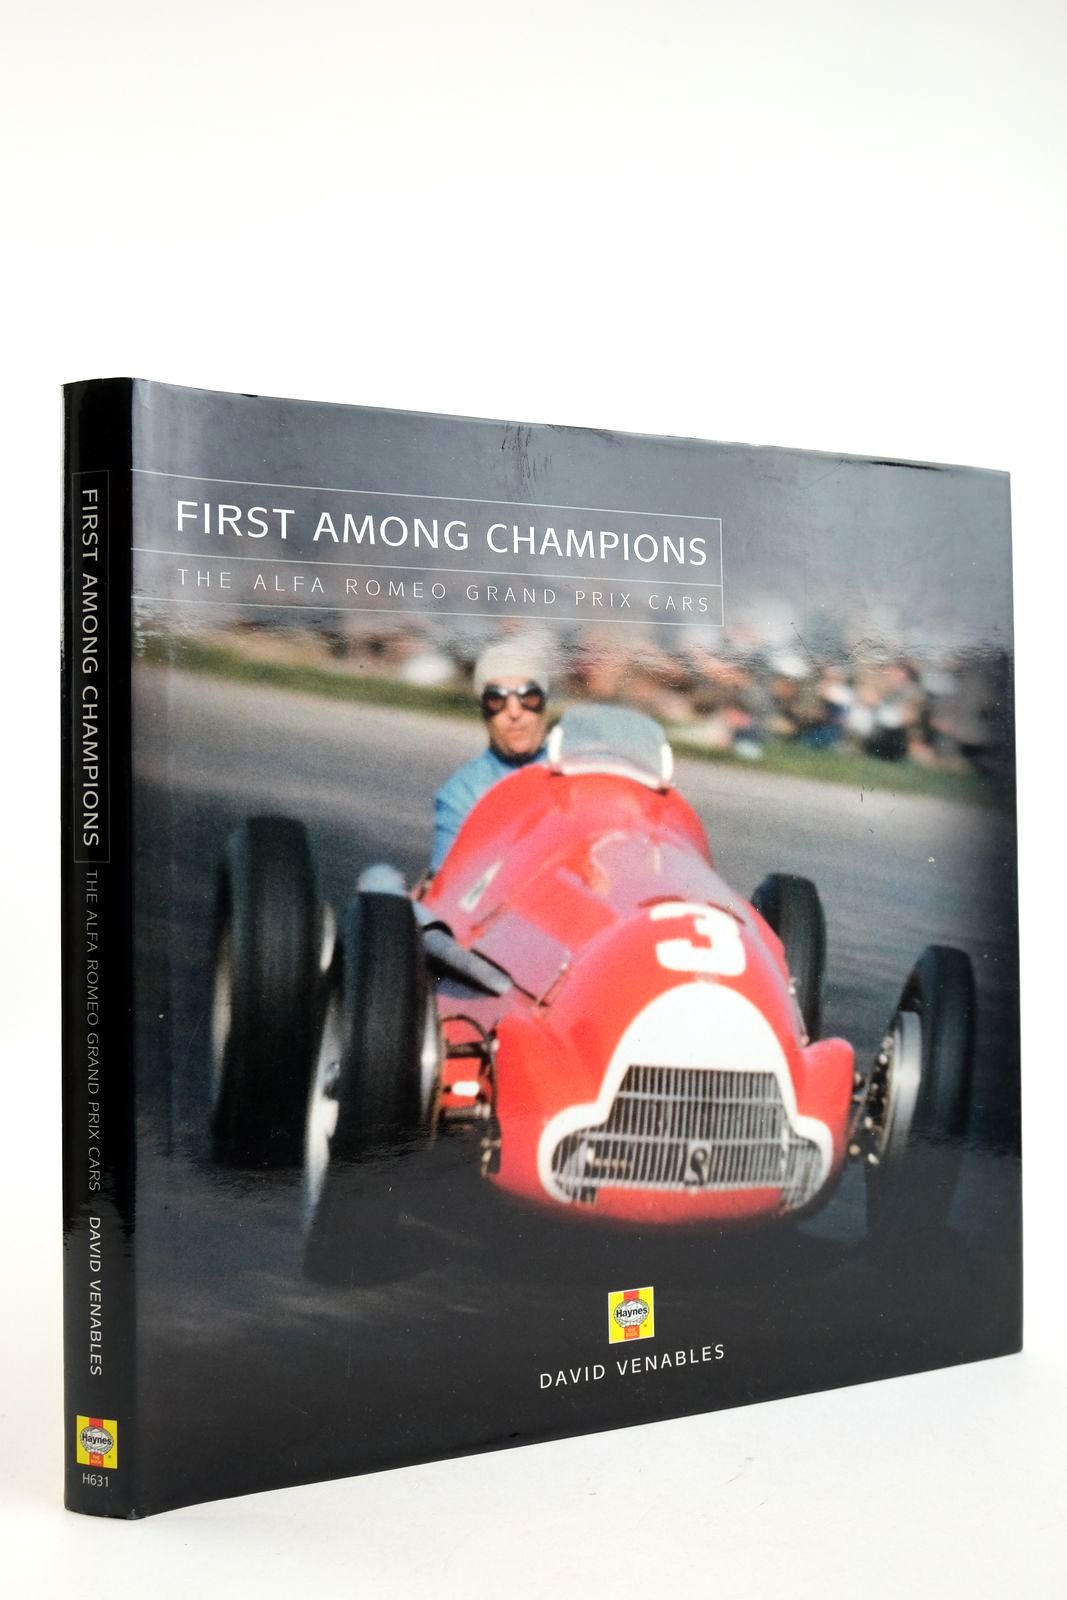 Photo of FIRST AMONG CHAMPIONS written by Venables, David published by Haynes Publishing Group (STOCK CODE: 2132836)  for sale by Stella & Rose's Books